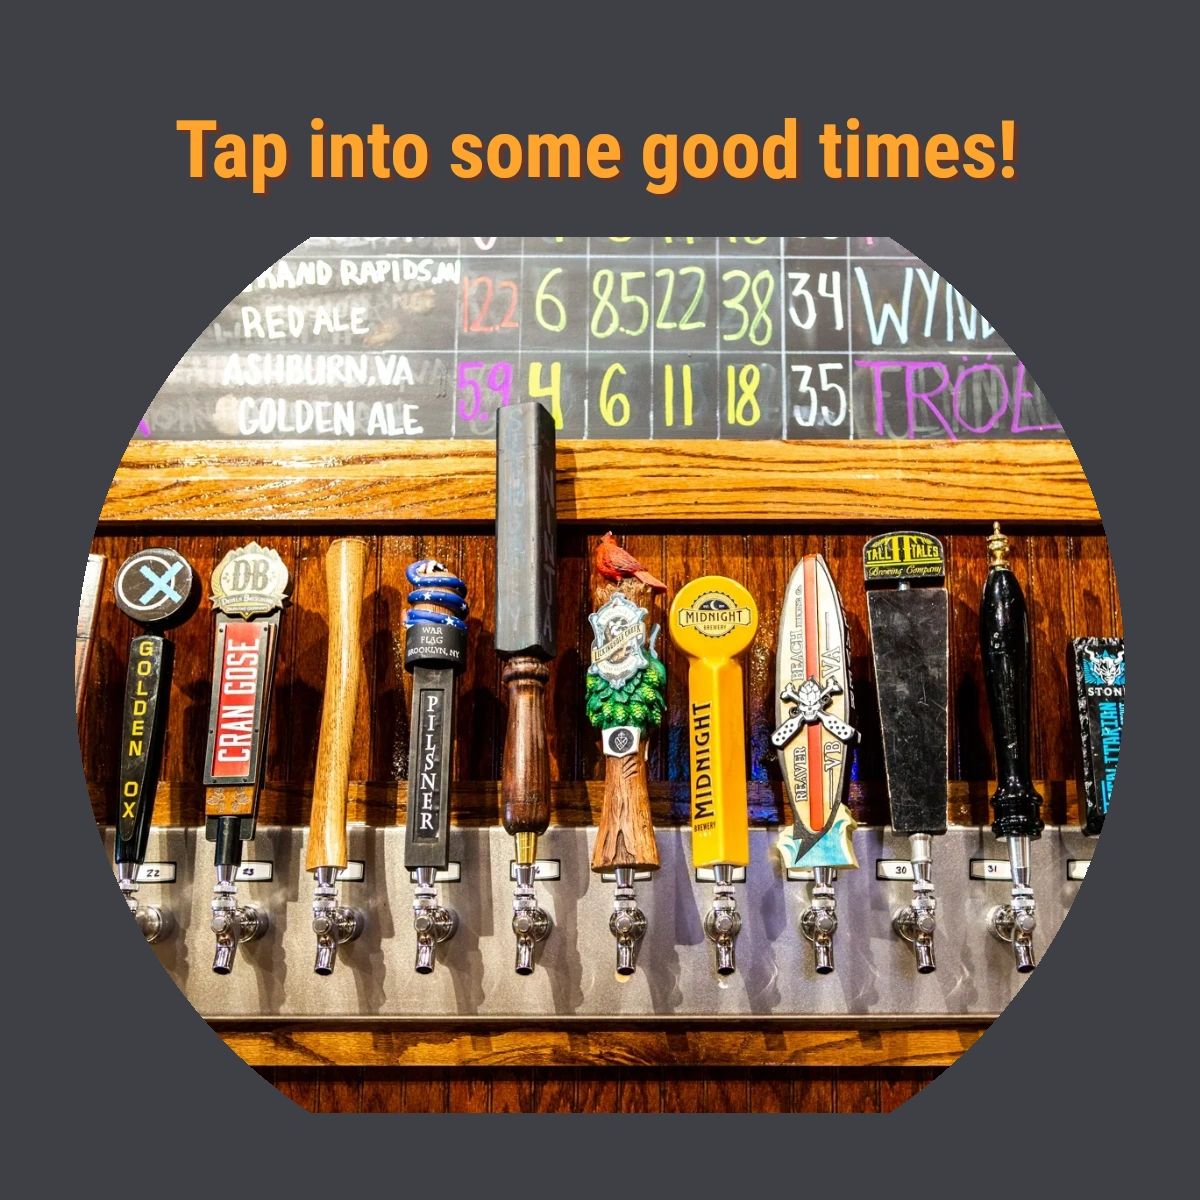 A night out is better at The Casual Pint! Grab your friends and head to our place for a craft brew and a delicious meal.